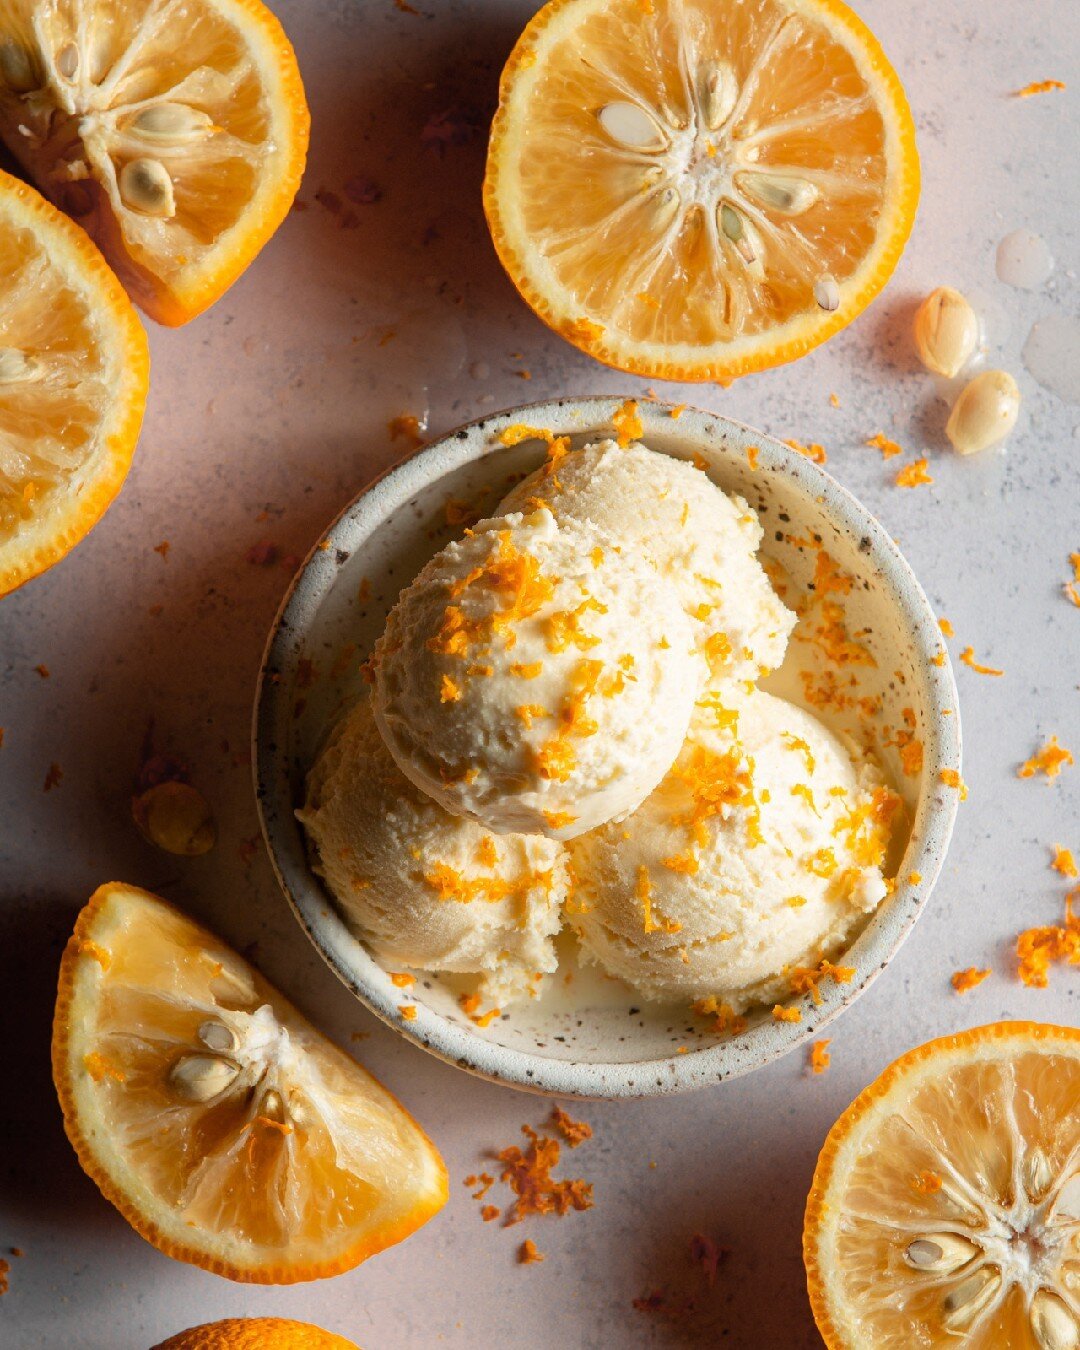 It's over 100&ordm; today&mdash;couldn't ask for a more appropriate day to be #nationalicecreamday 🍨

Yuzu Ice Cream on my blog, kneadbakecook.com.